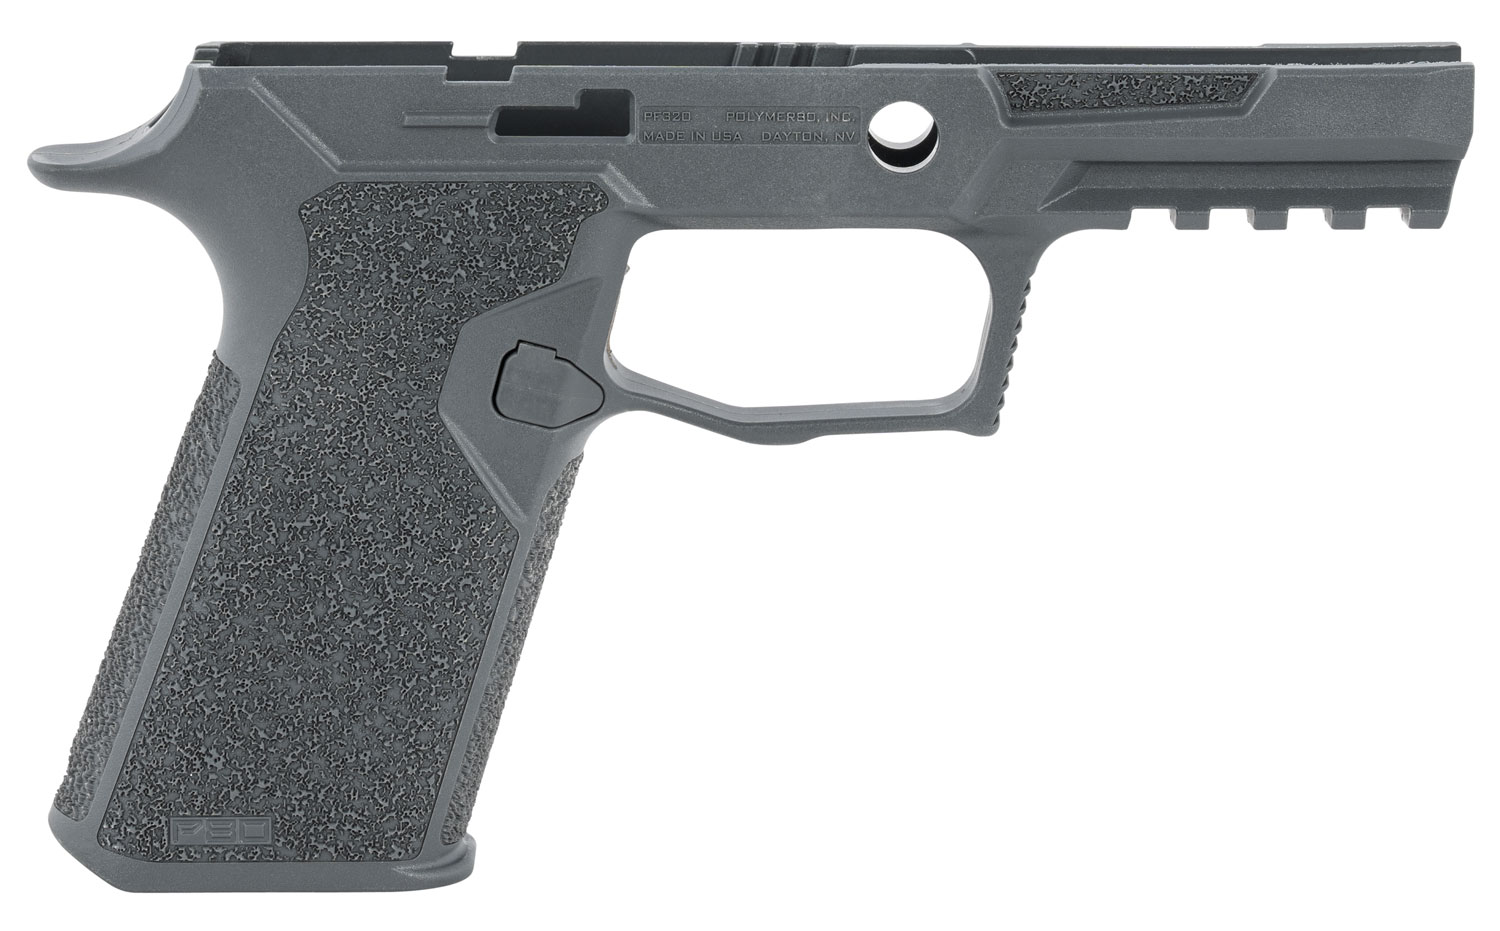 Polymer80 PF320-GRY PF320 Grip Module Kit Sig P320 Full, Carry/230 X5 Full, Carry/230 VTac Polymer Gray